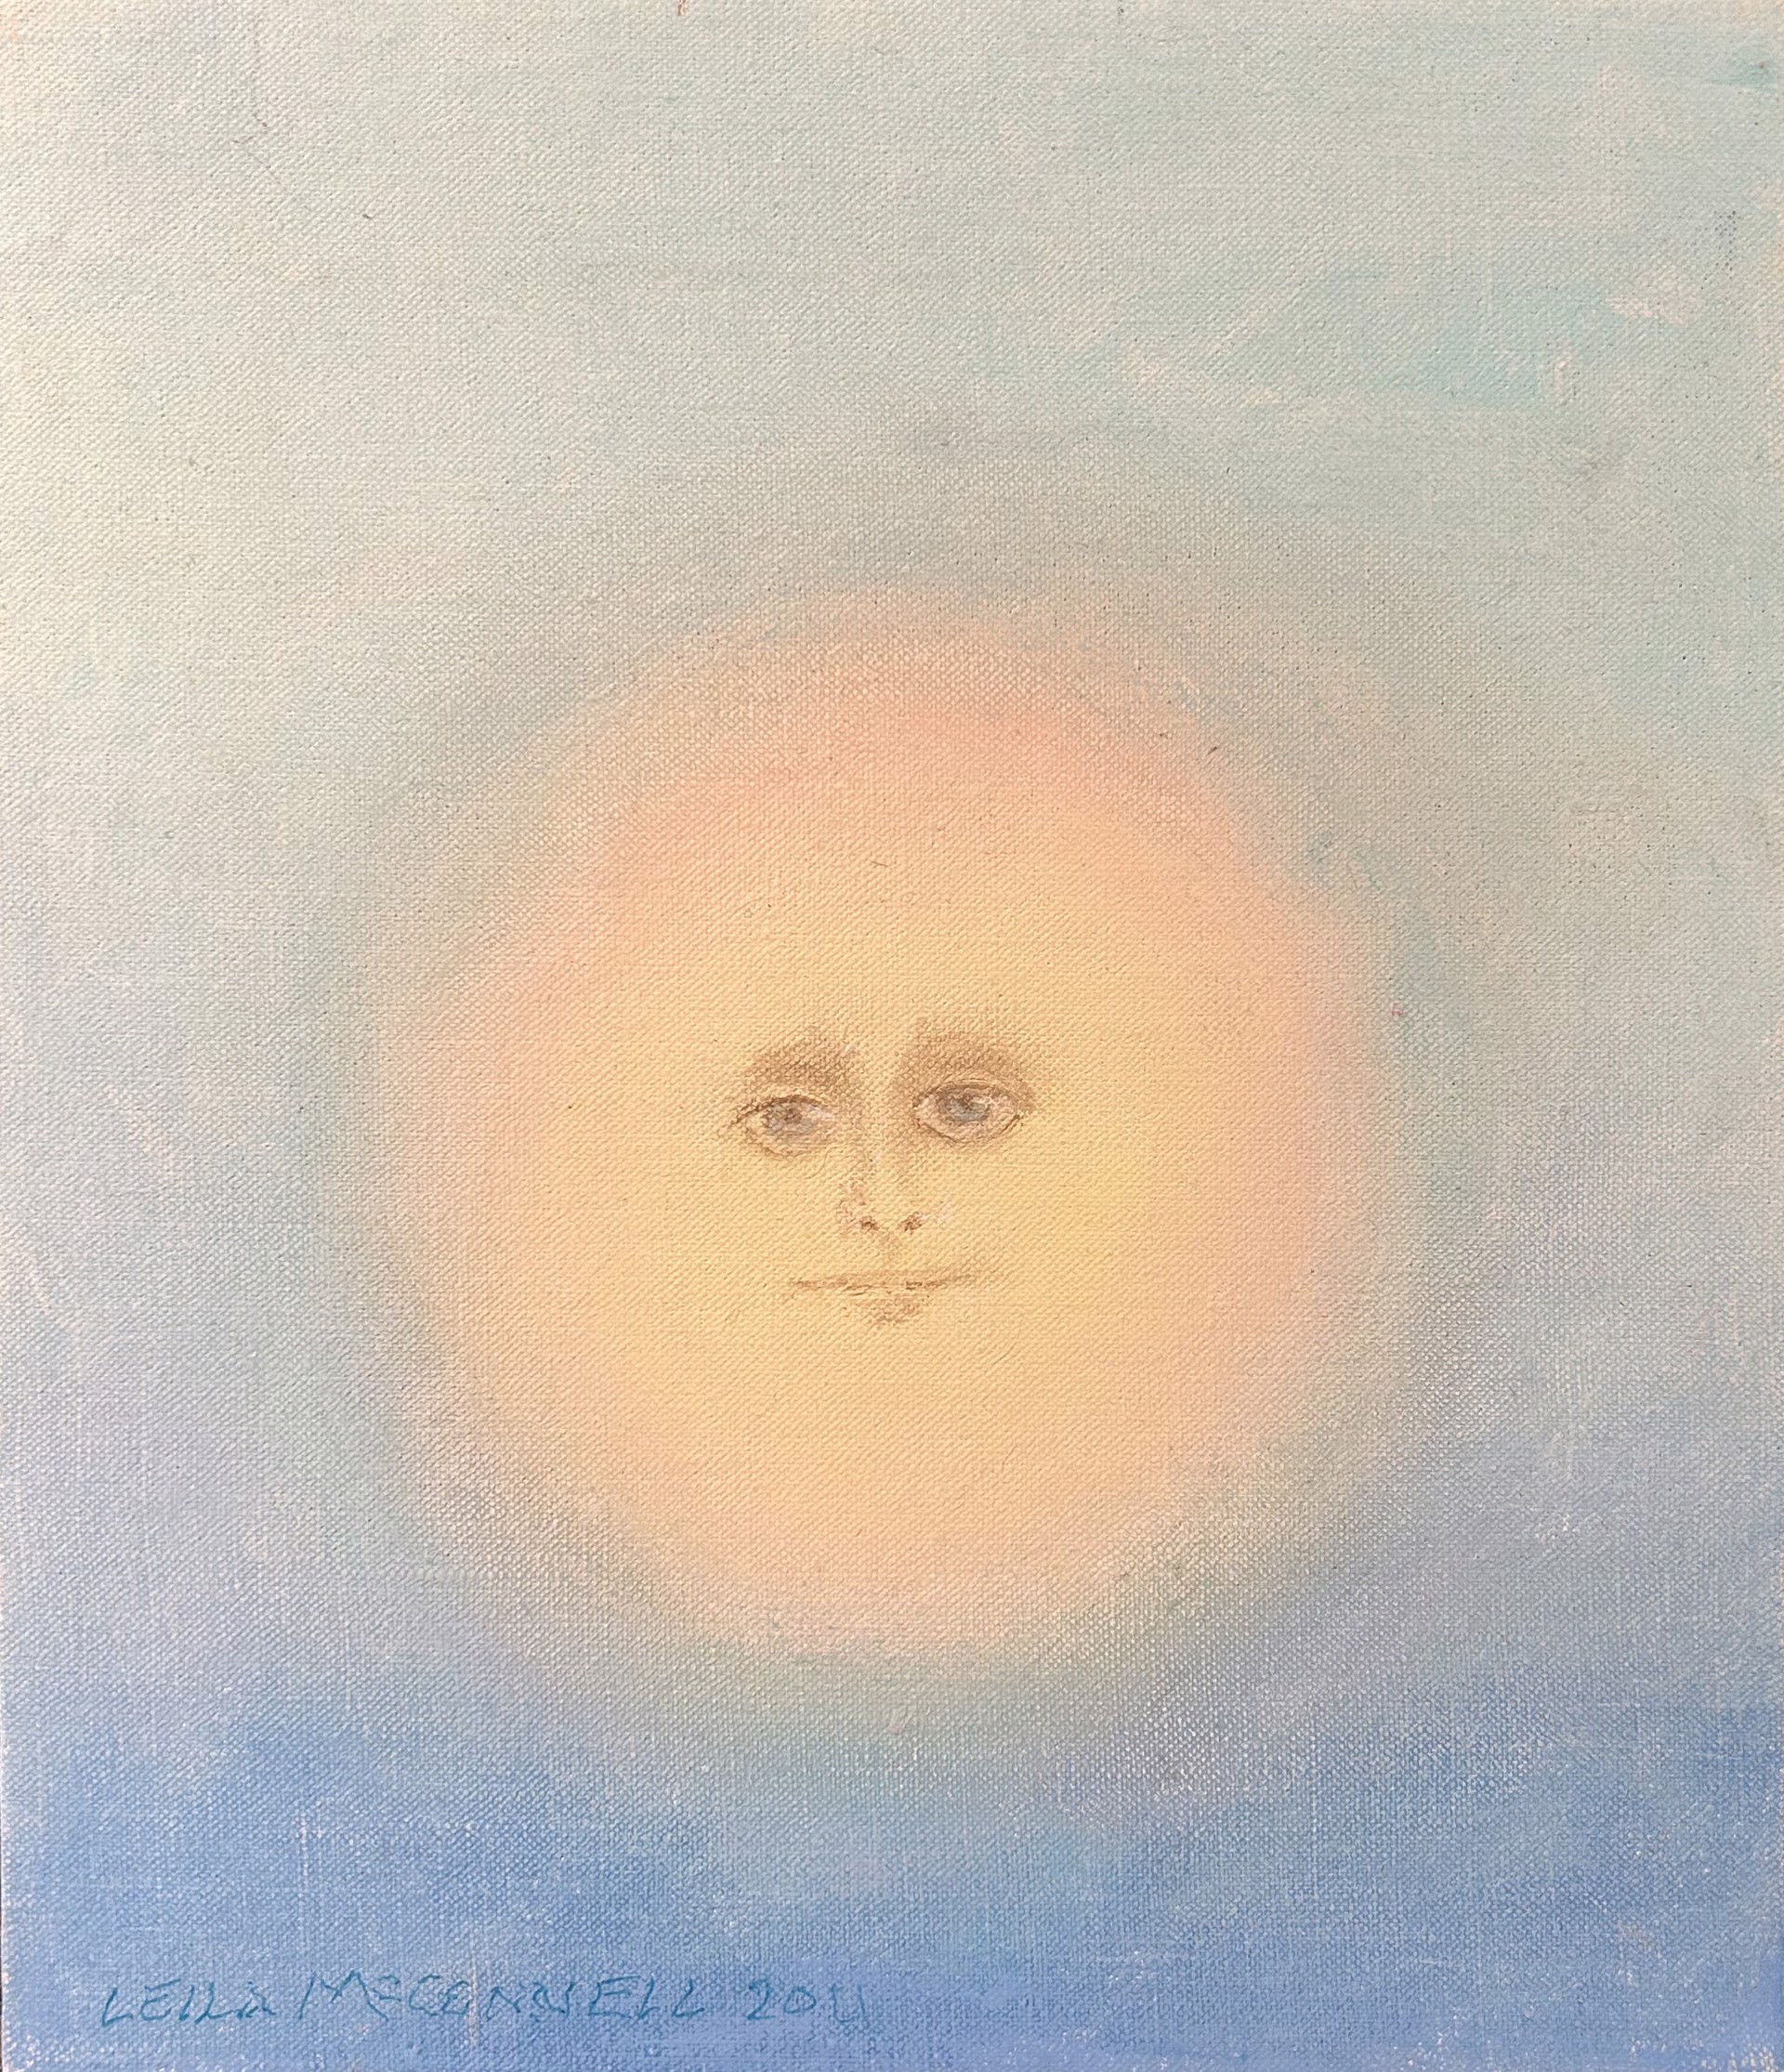 Moonface - blue background with yellow face by Leila McConnell